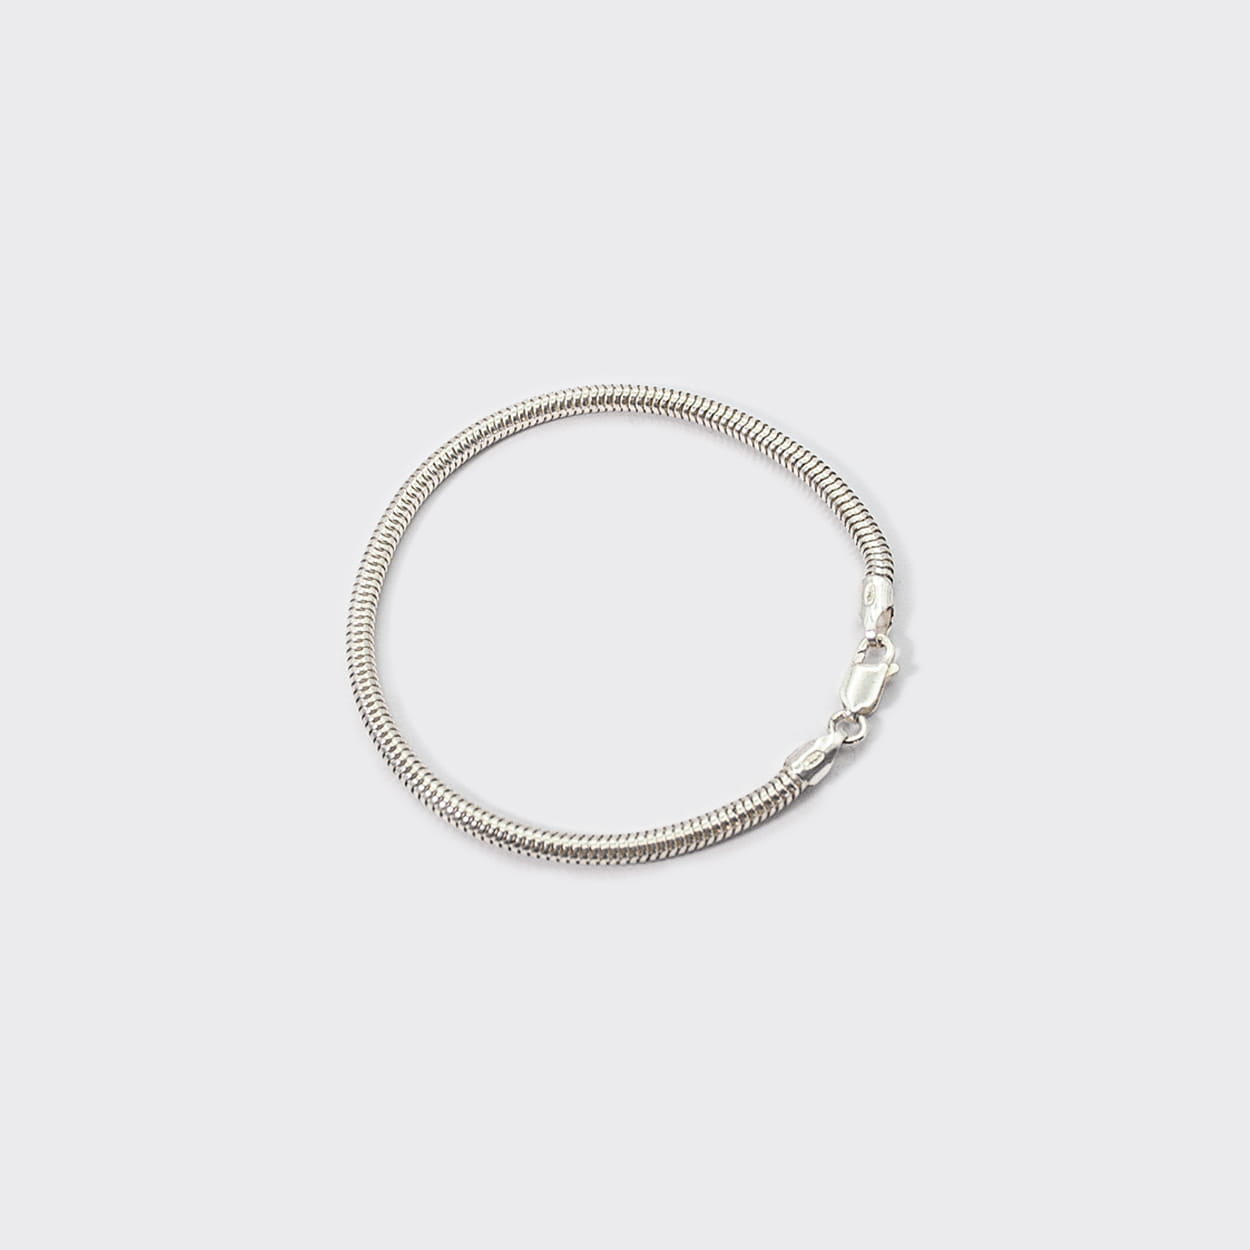 Atelier Domingo's Mamba silver bracelet is made of solid 925 Sterling silver. This unisex bracelet is the classic snake chain. This jewelry is made in Italy and designed to be a bracelet for both men and women.